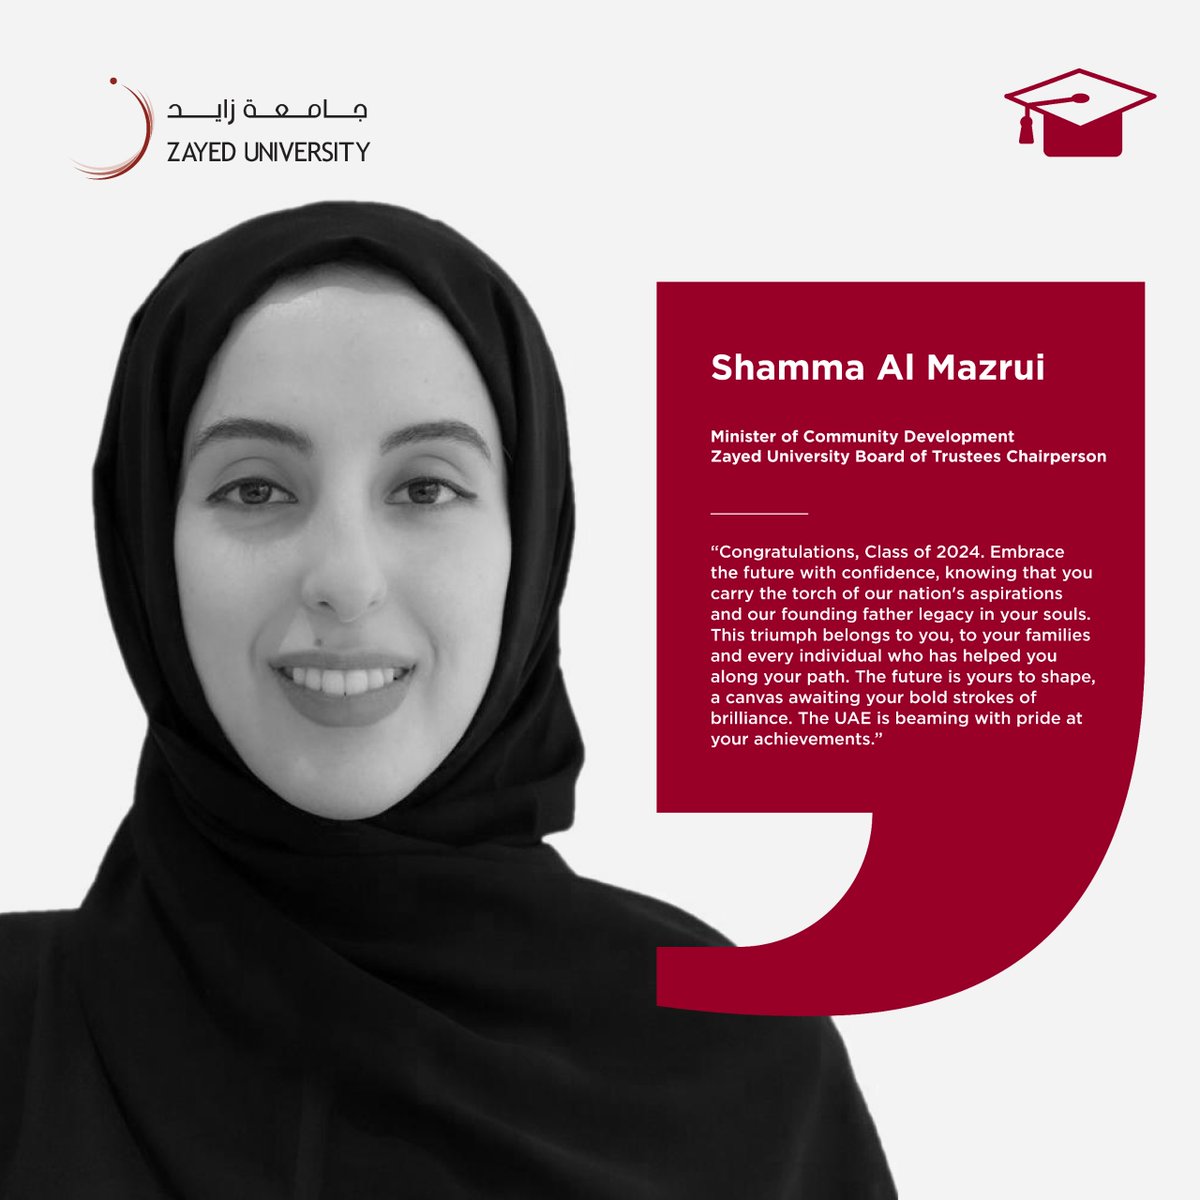 HE Shamma Al Mazrui, Minister of Community Development and Zayed University Board of Trustees Chairperson, imparts her pride in the Class of 2024.

Carry forward the torch of our nation's aspirations. Congratulations, Future Makers!

#ZU #leadership #ZayedUniversity #ADNEC